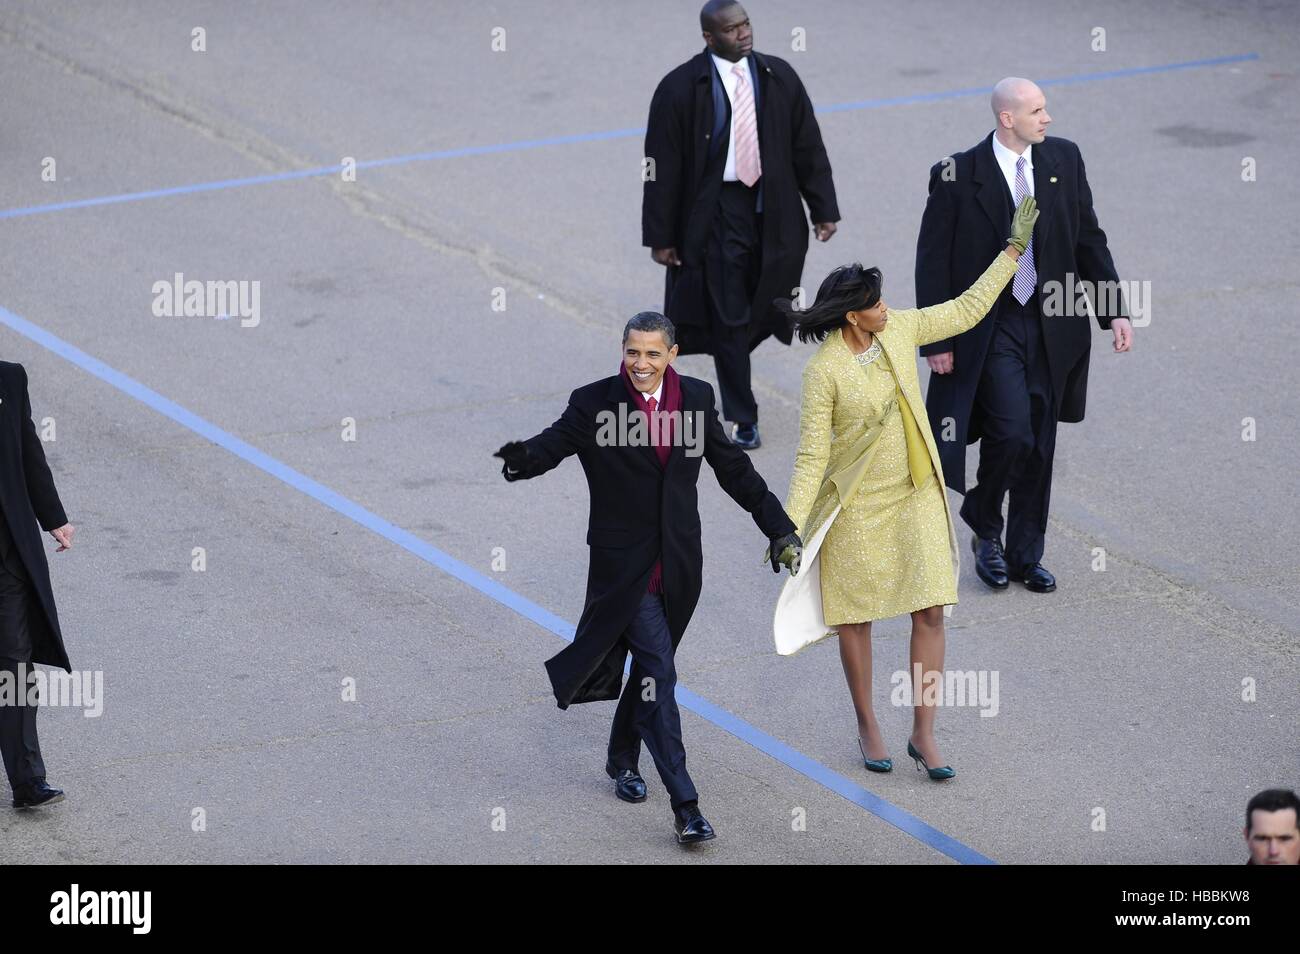 President and Michelle Obama wave to the crowd along Pennsylvania Avenue during the 2009 presidential inaugural parade. Jan. 20 Stock Photo